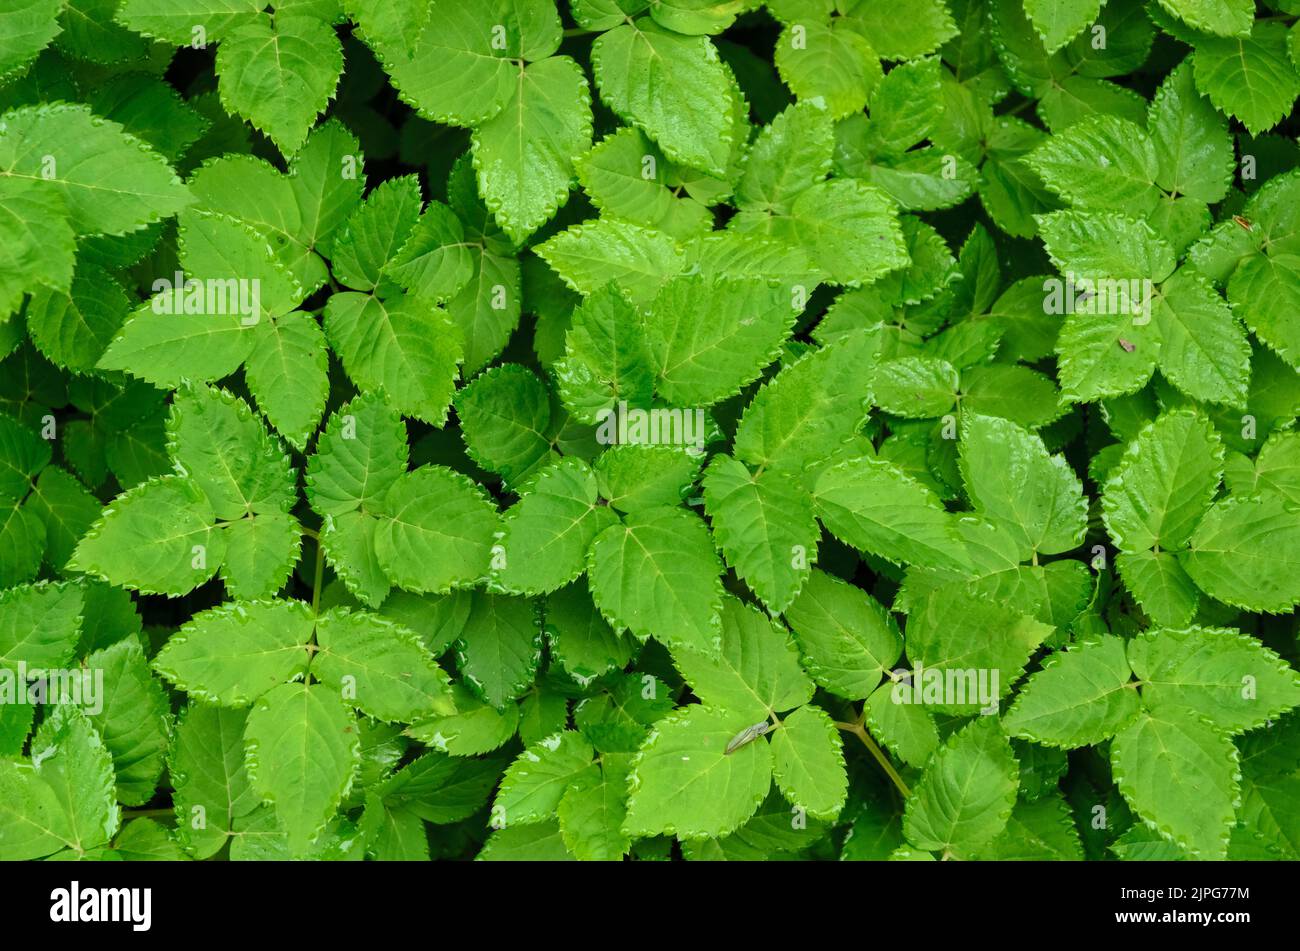 Aegopodium podagraria plant known as ground elder, herb gerard or bishop's weed in a forest in Germany Stock Photo